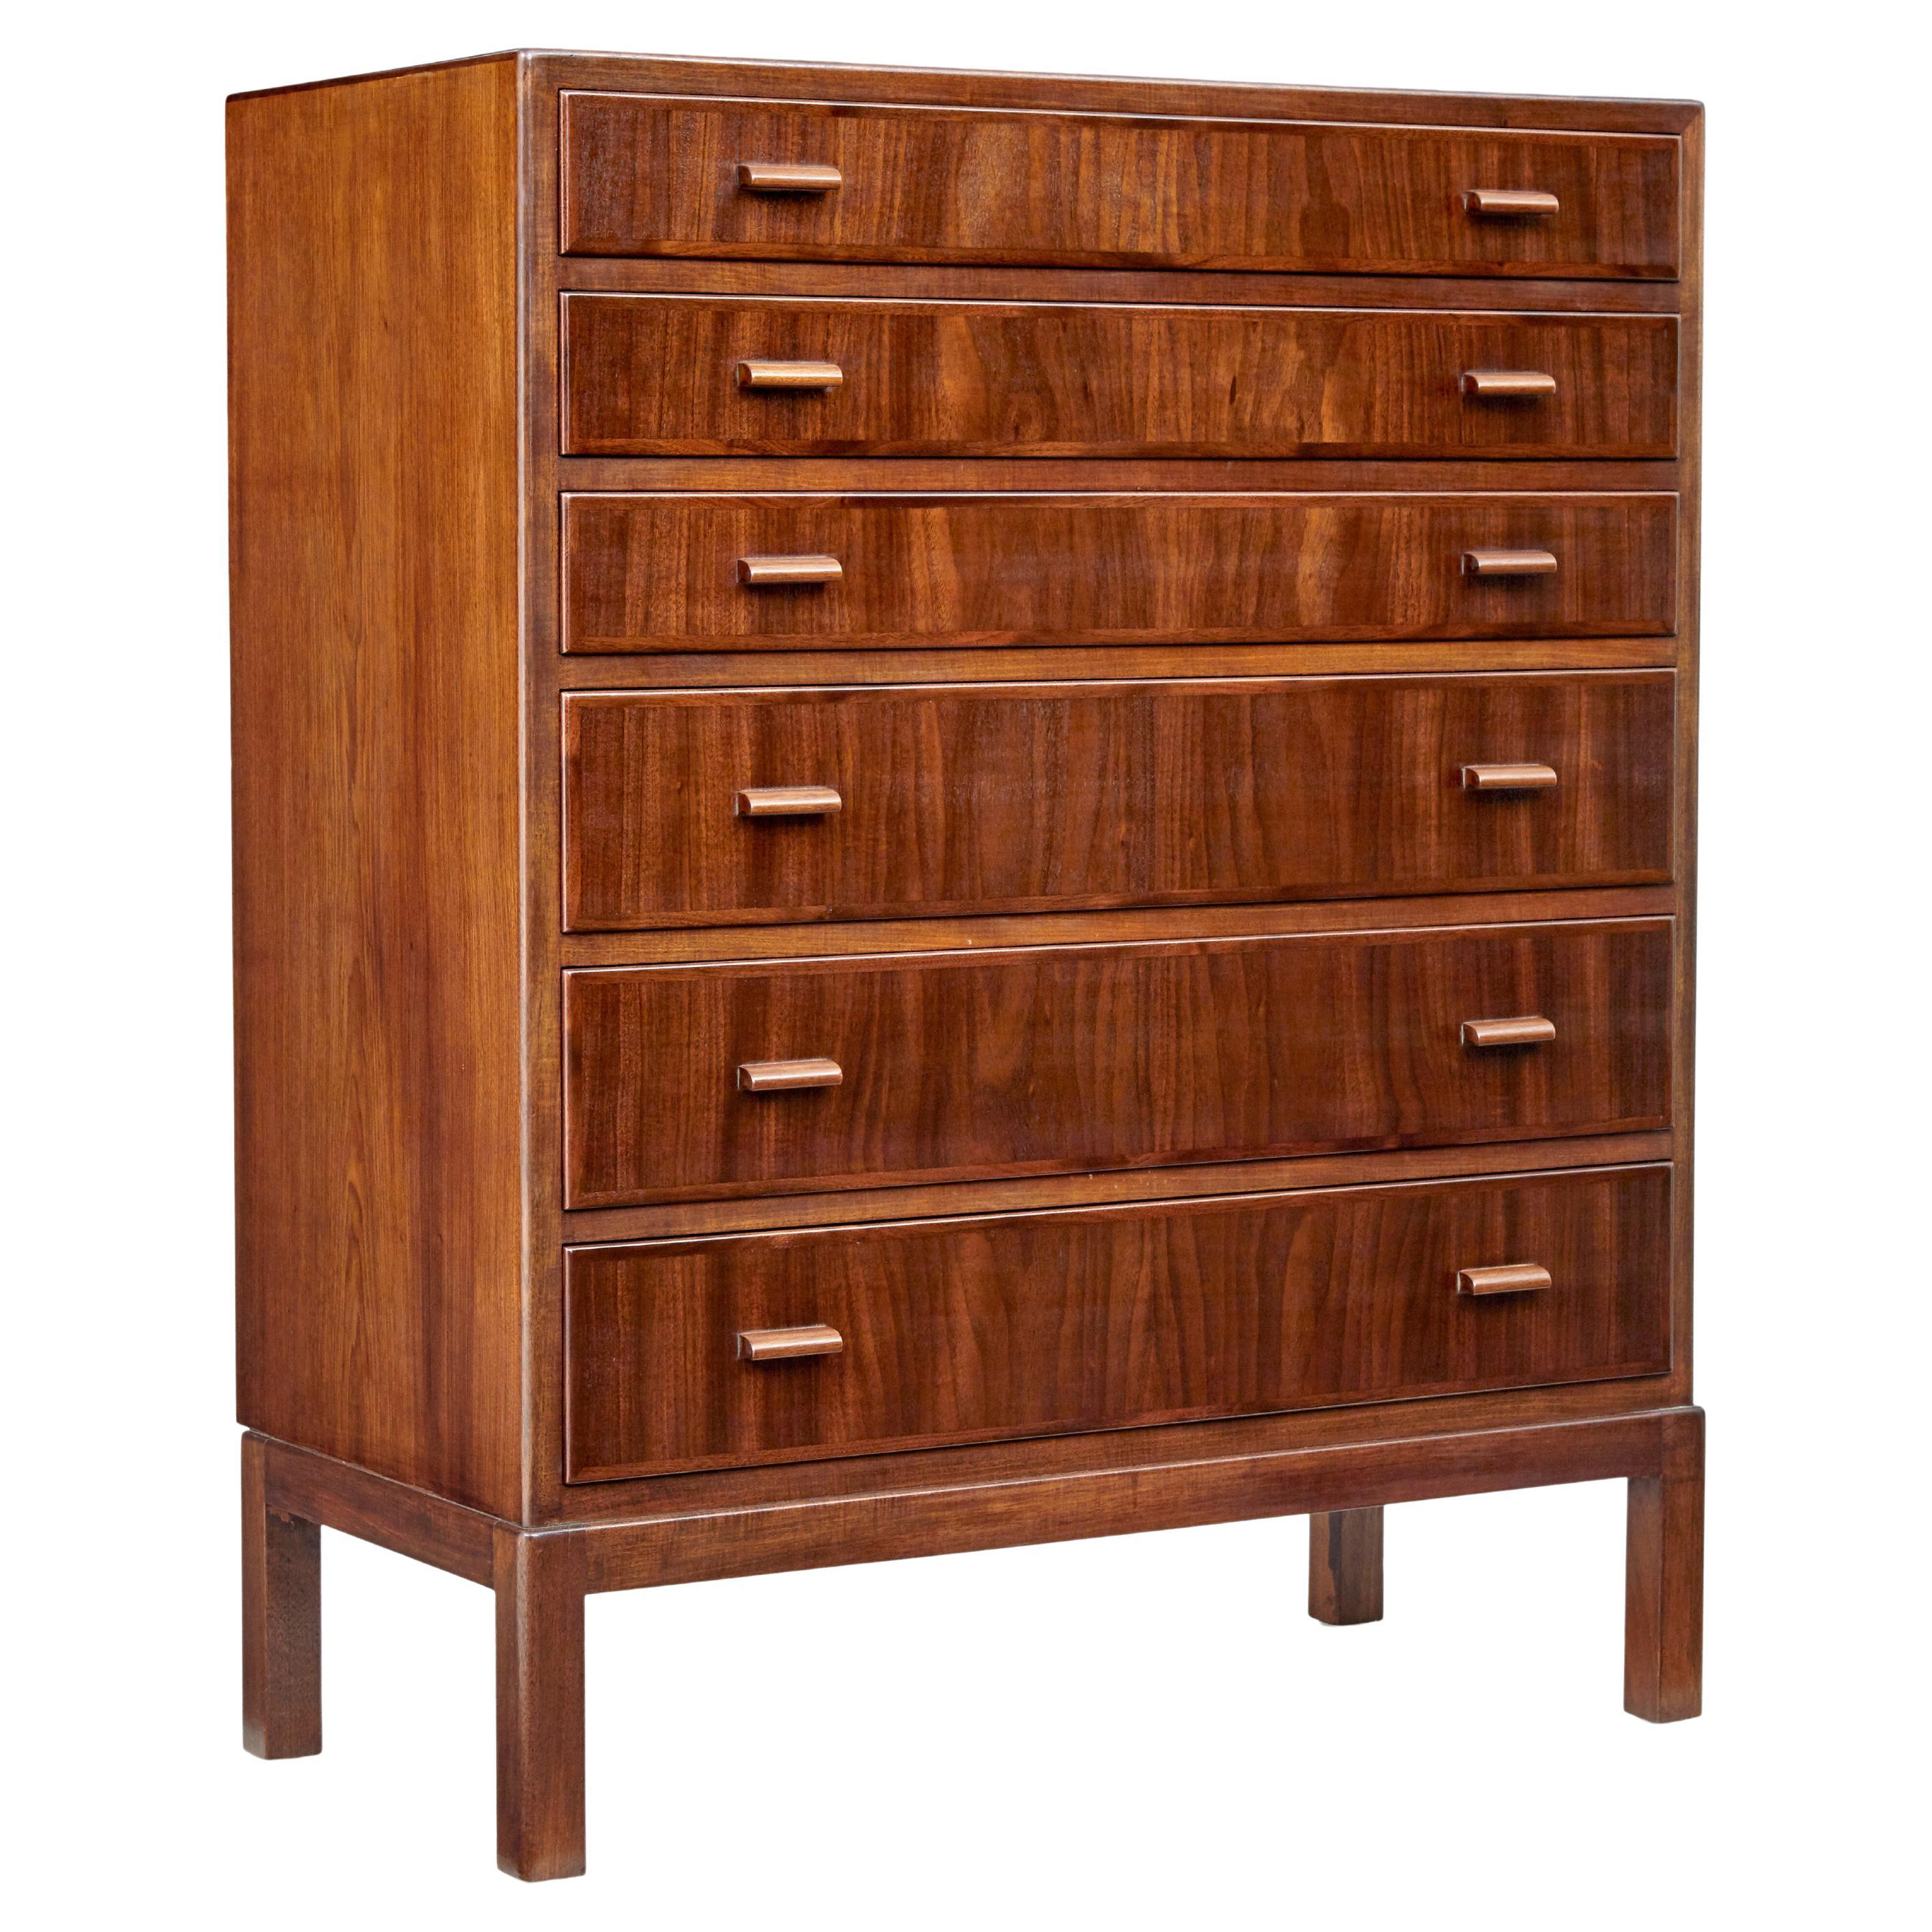 Mid-20th Century Danish Teak Chest of Drawers For Sale